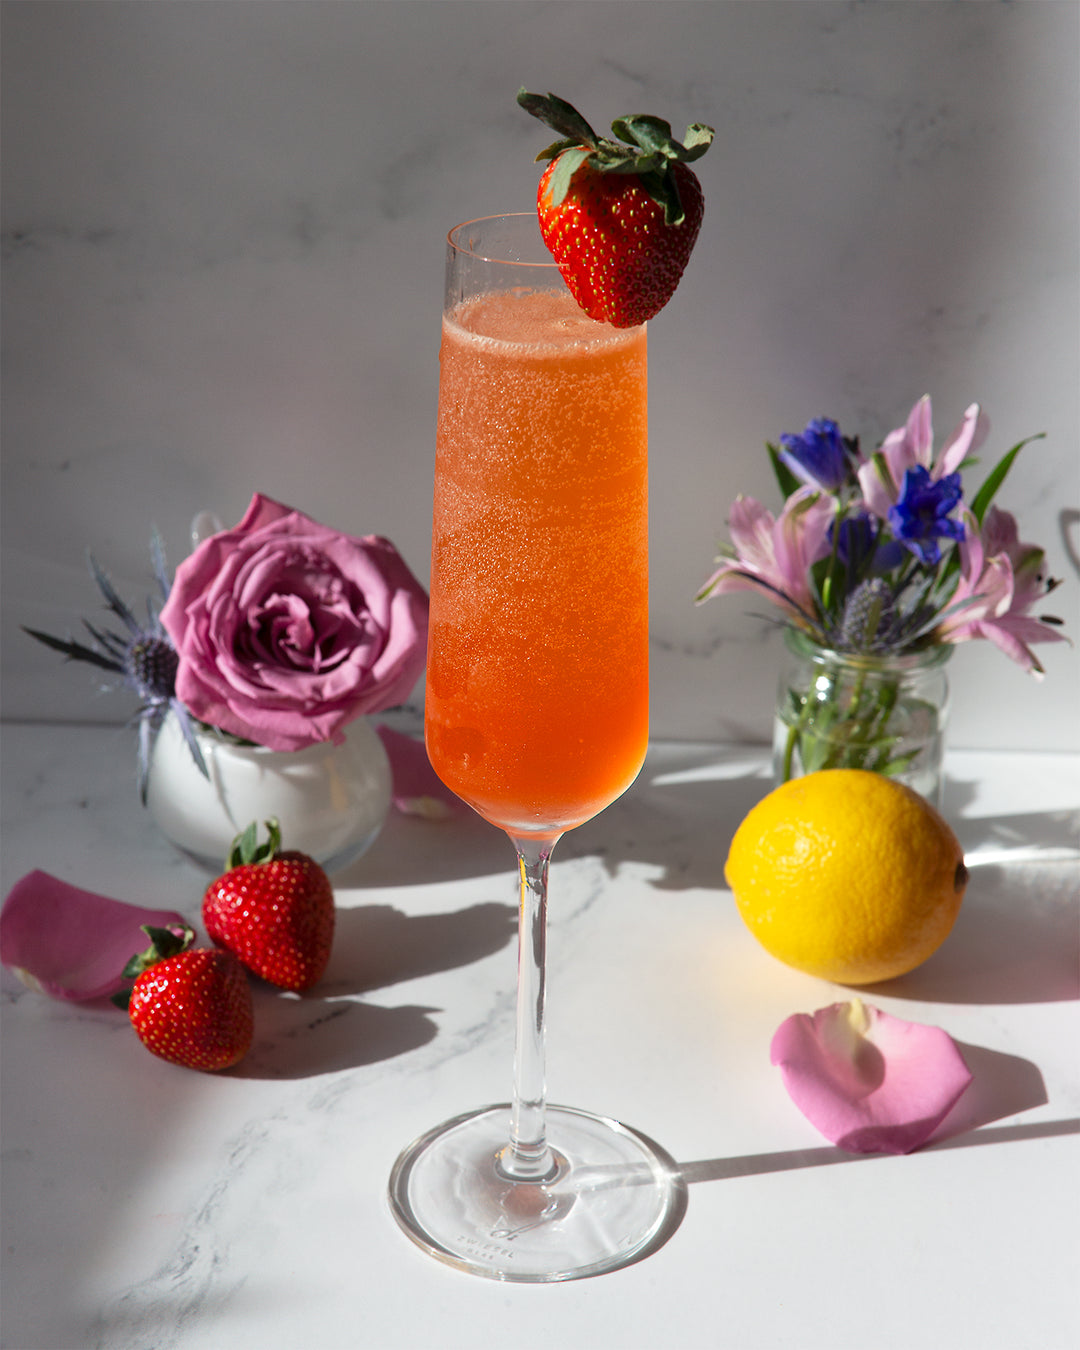 An Ideal Husband strawberry Champagne margarita in a Champagne flute with a strawberry garnish in a scene with flowers, strawberries, and a lemon.